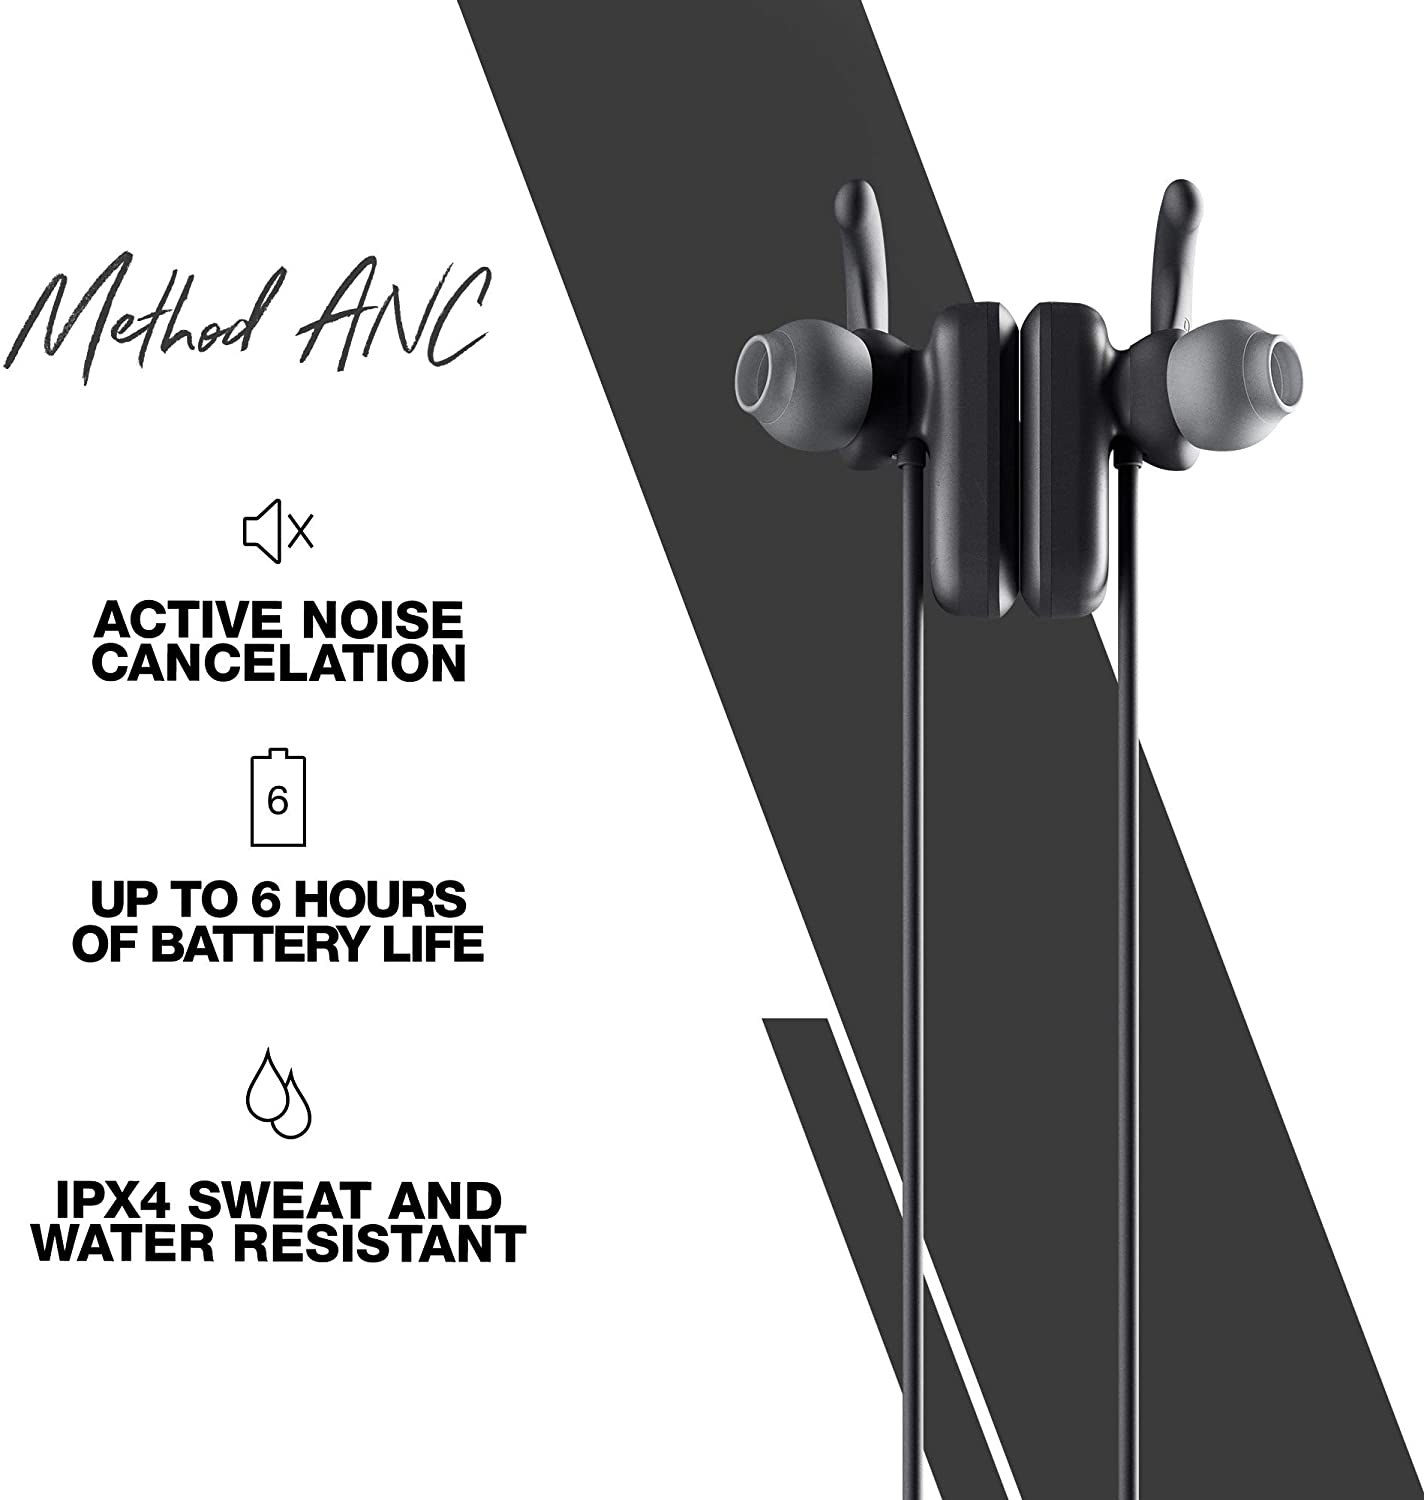 Skullcandy Method ANC IPX4 Sweat and Water Resistant Wireless In-Ear Earbuds with Magnetic Buds and Microphone (BLACK, RED)